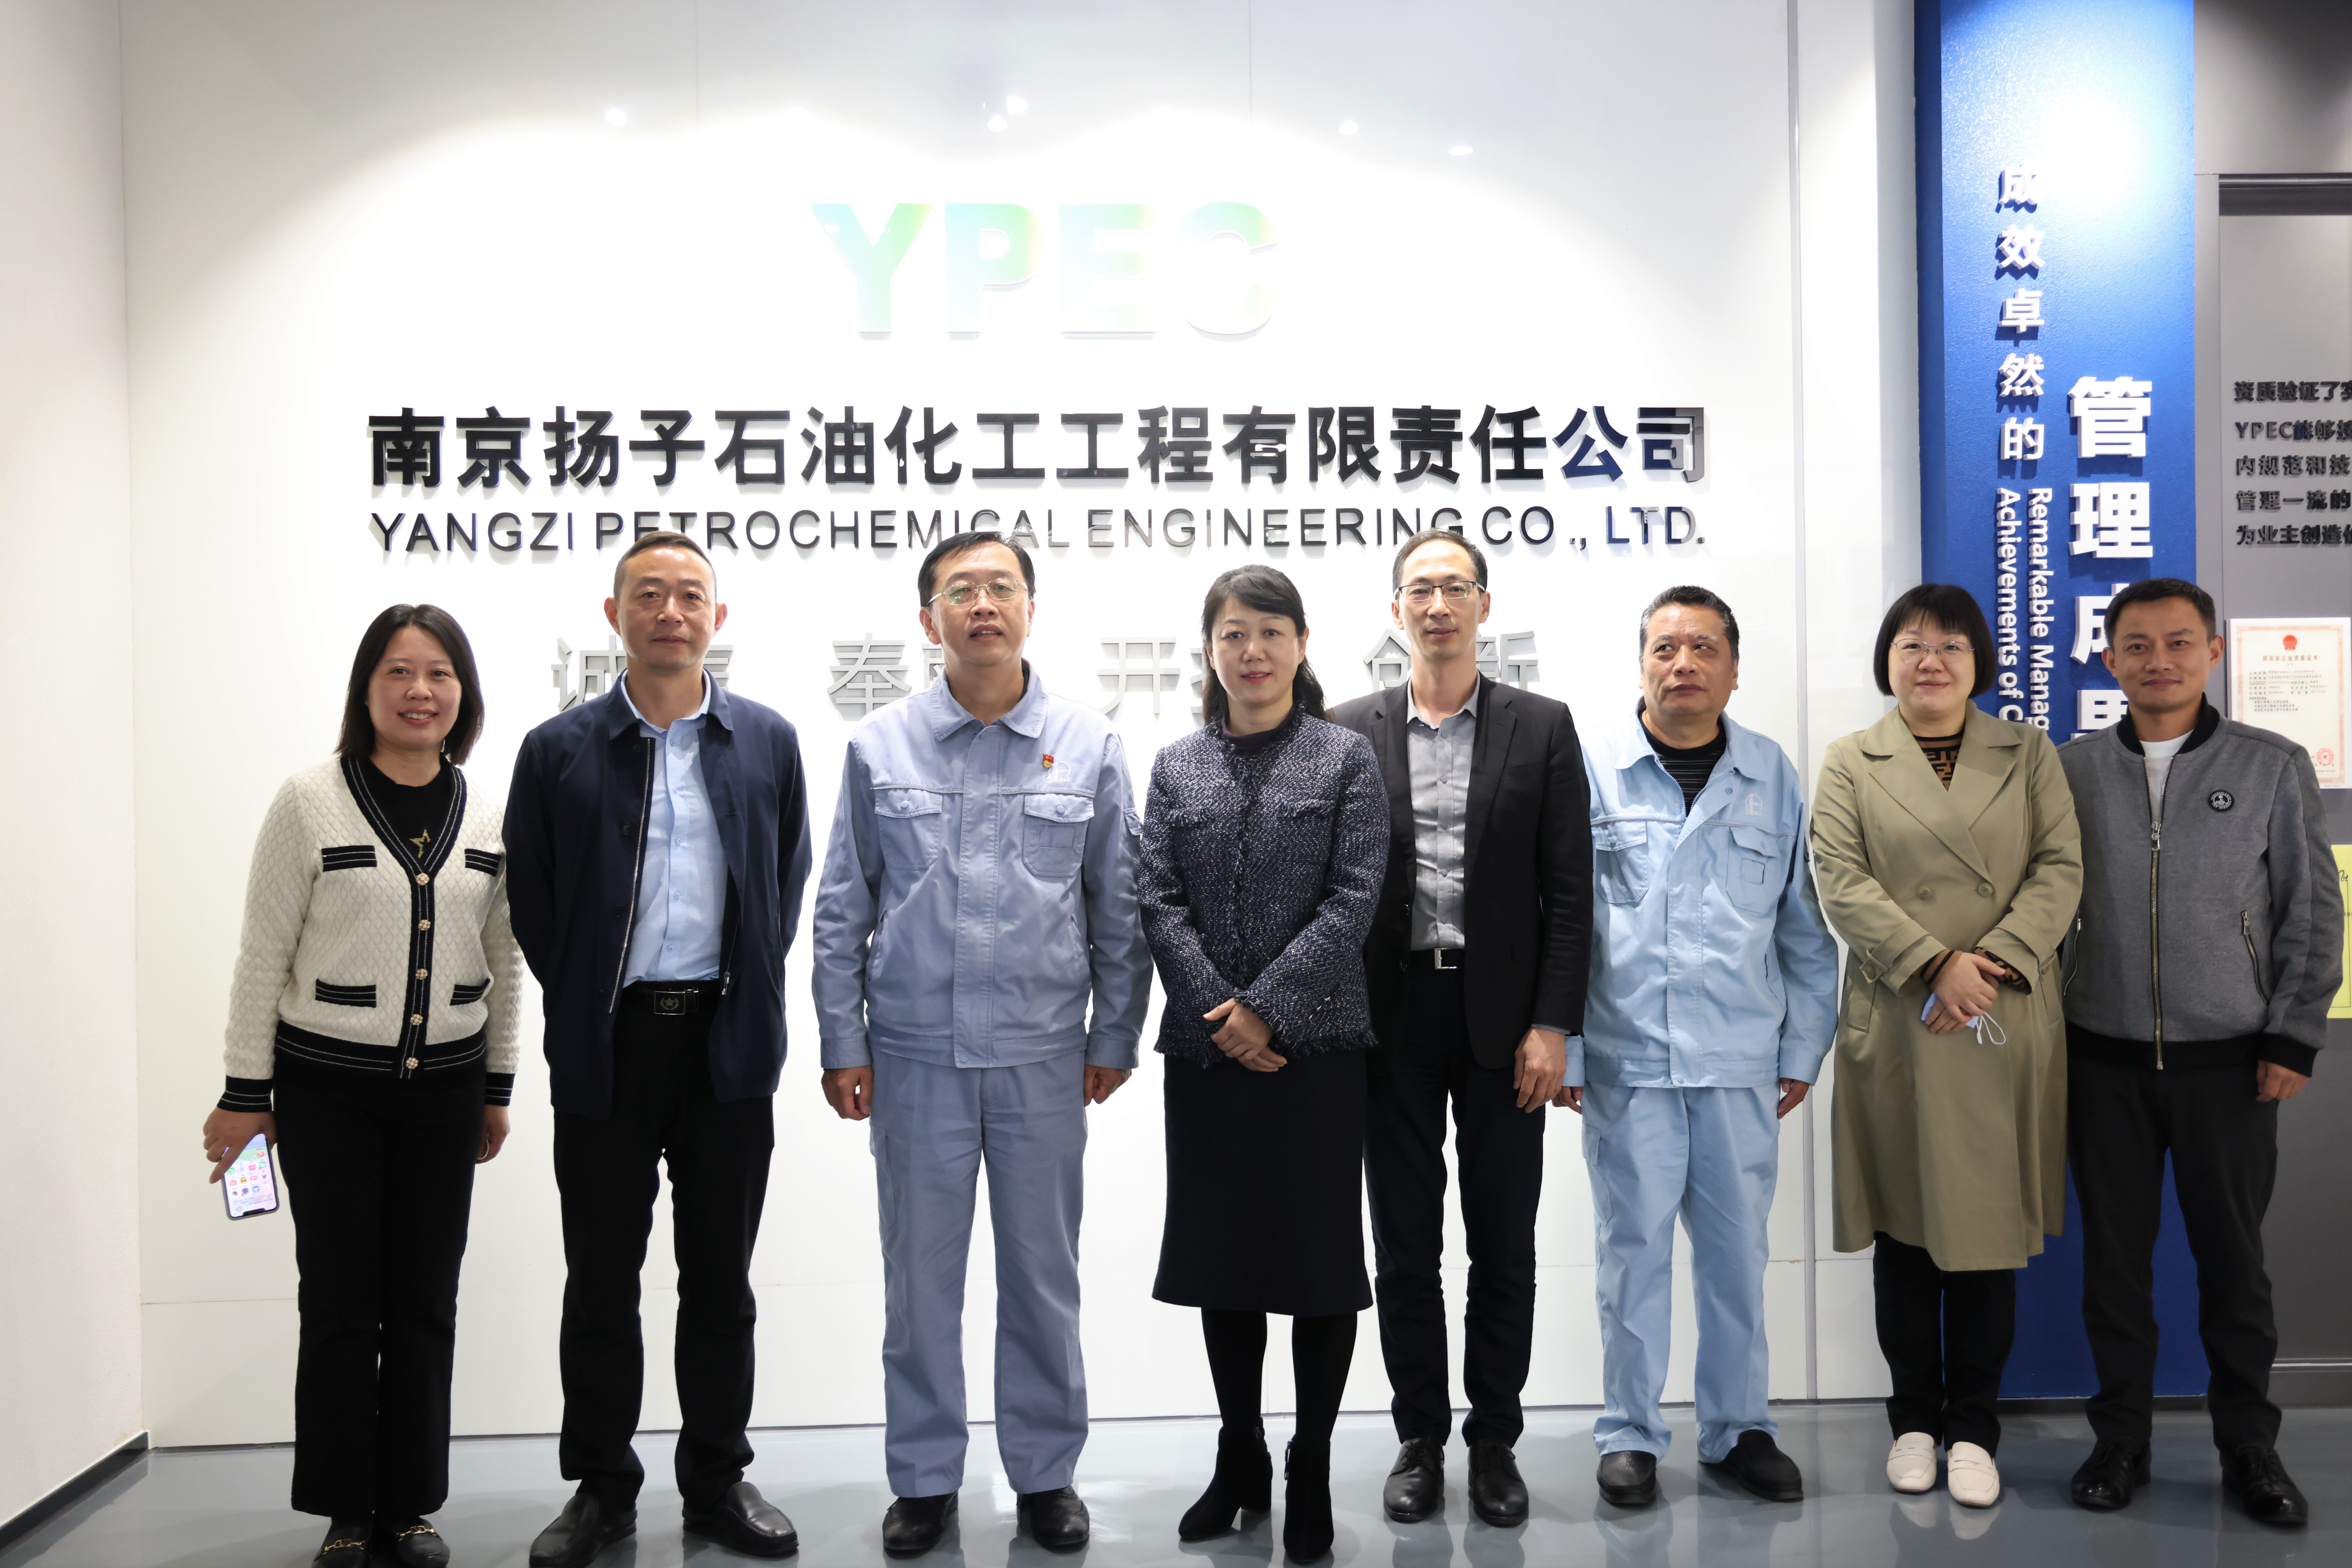 Jiangbei New District Federation of Trade Unions and Dachang Street Federation of Trade Unions to inspect and guide the company's trade union work